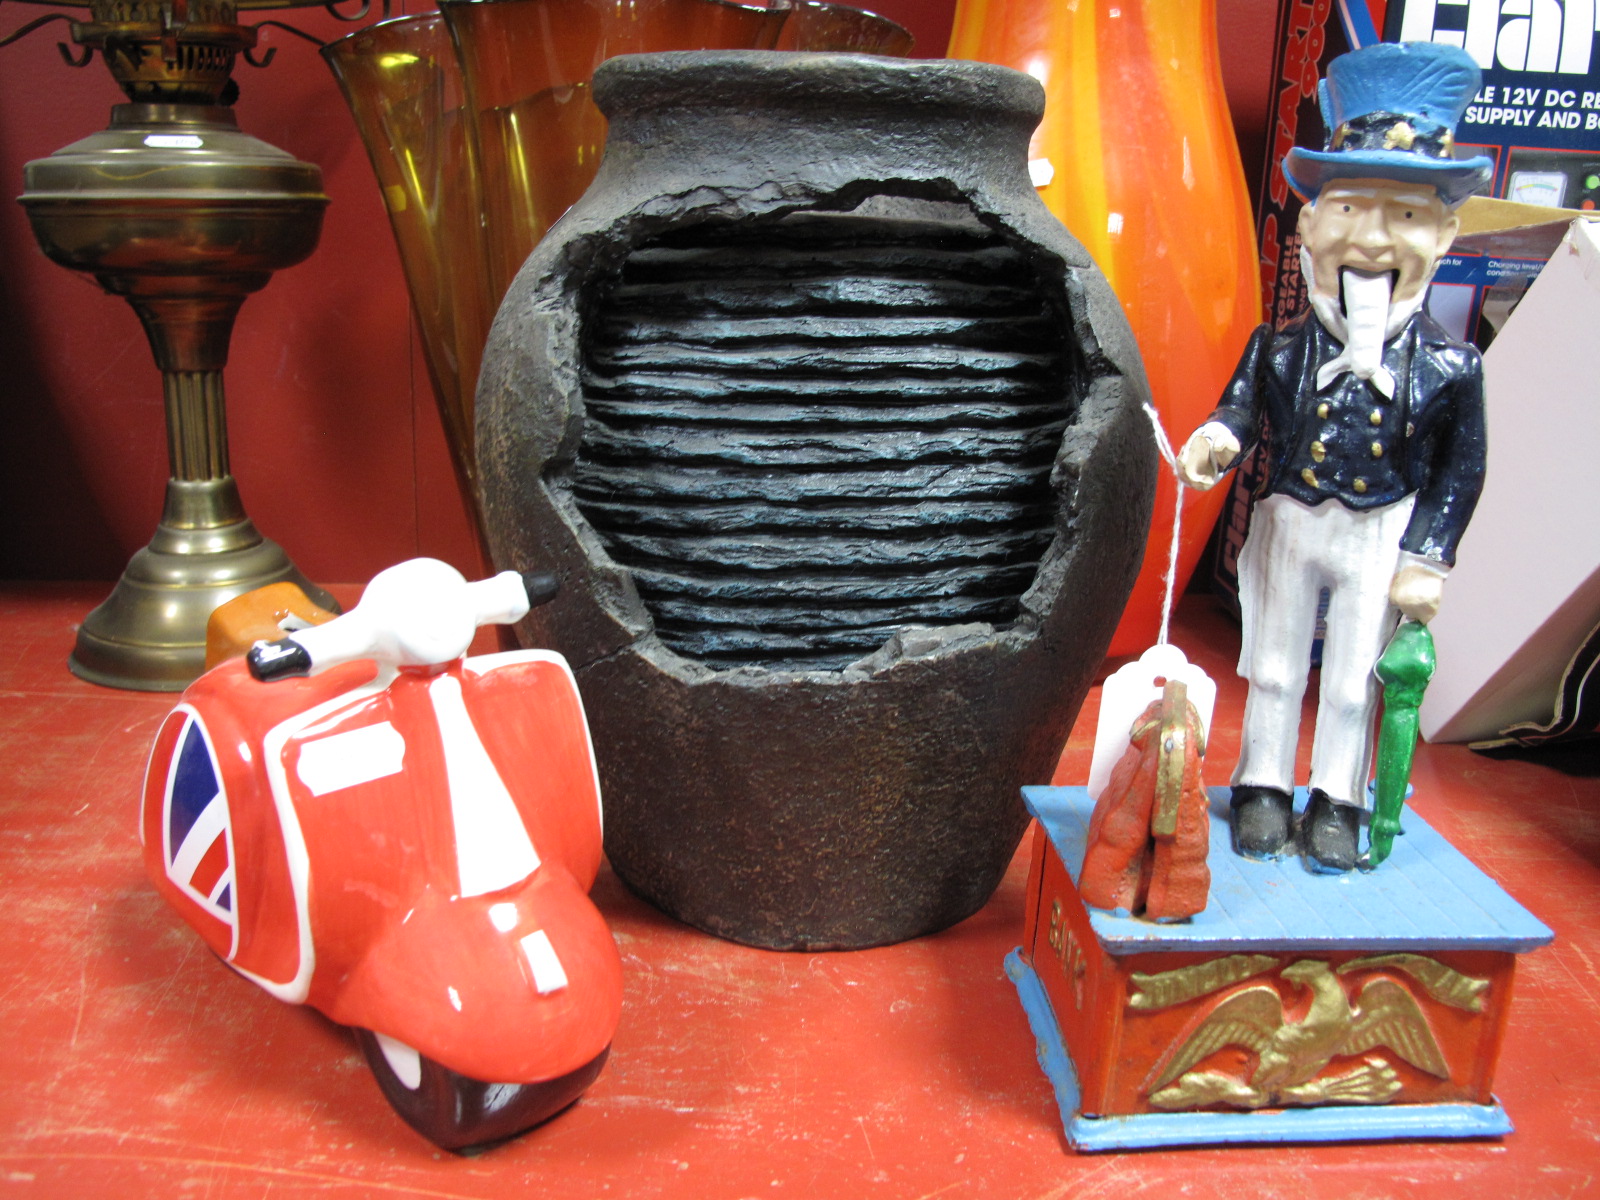 A Reproduction American 'Uncle Sam' Cast Iron Money Bank, a pottery scooter money bank and a vase